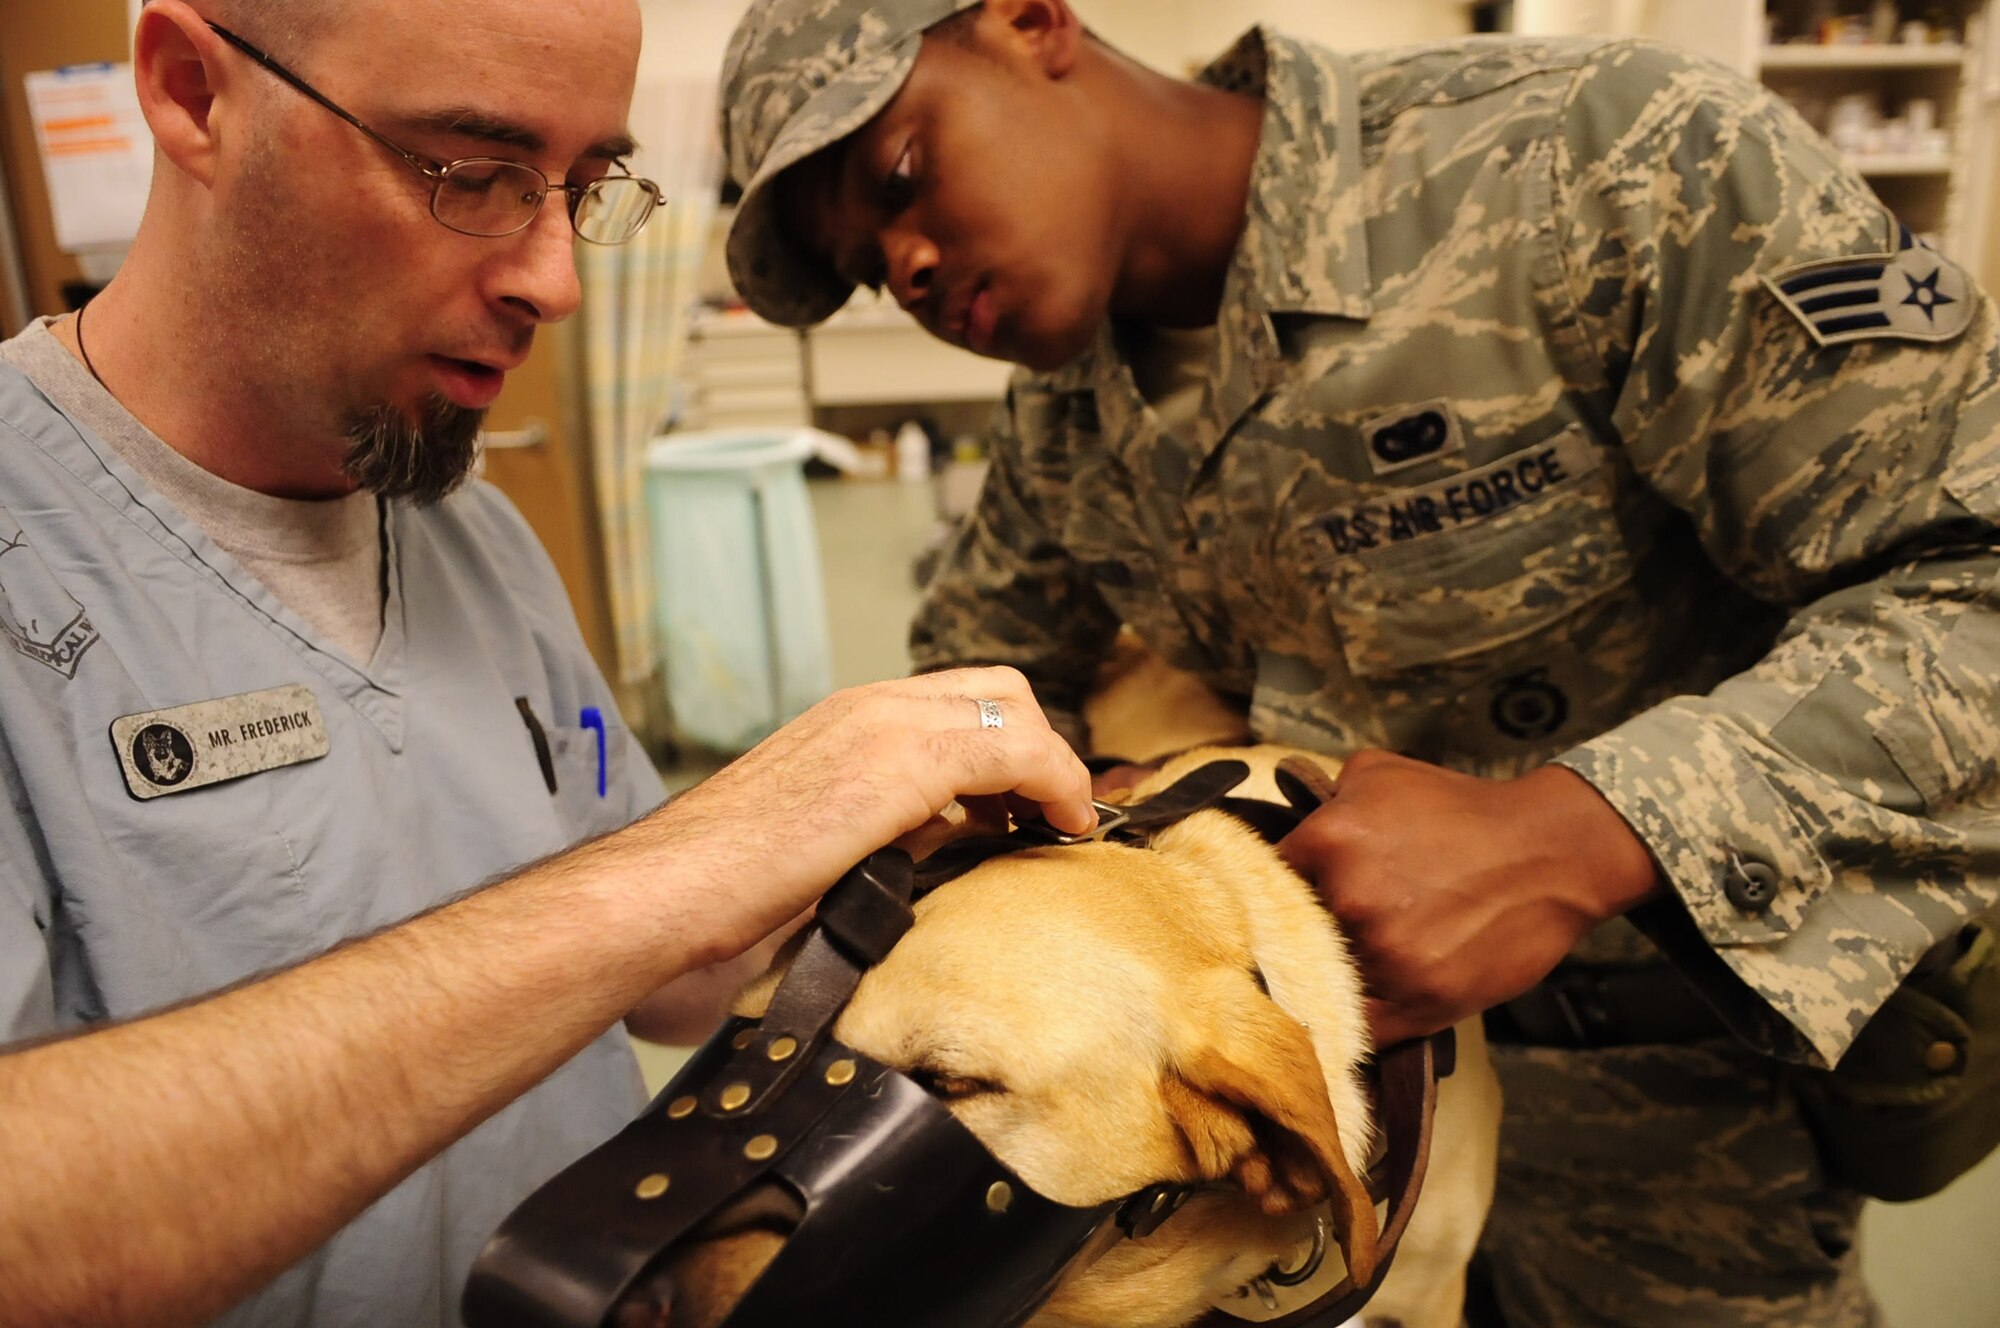 Mr. Rufus Fredrick and Senior Airman Tommy Carter conduct a weekly checkup on a military working dog at Lackland Air Force Base, Texas, recently. To reassure all military working dogs are in proper health, each dog is given a weekly checkup. (U.S. Air Force photo/Senior Airman Christopher Griffin)